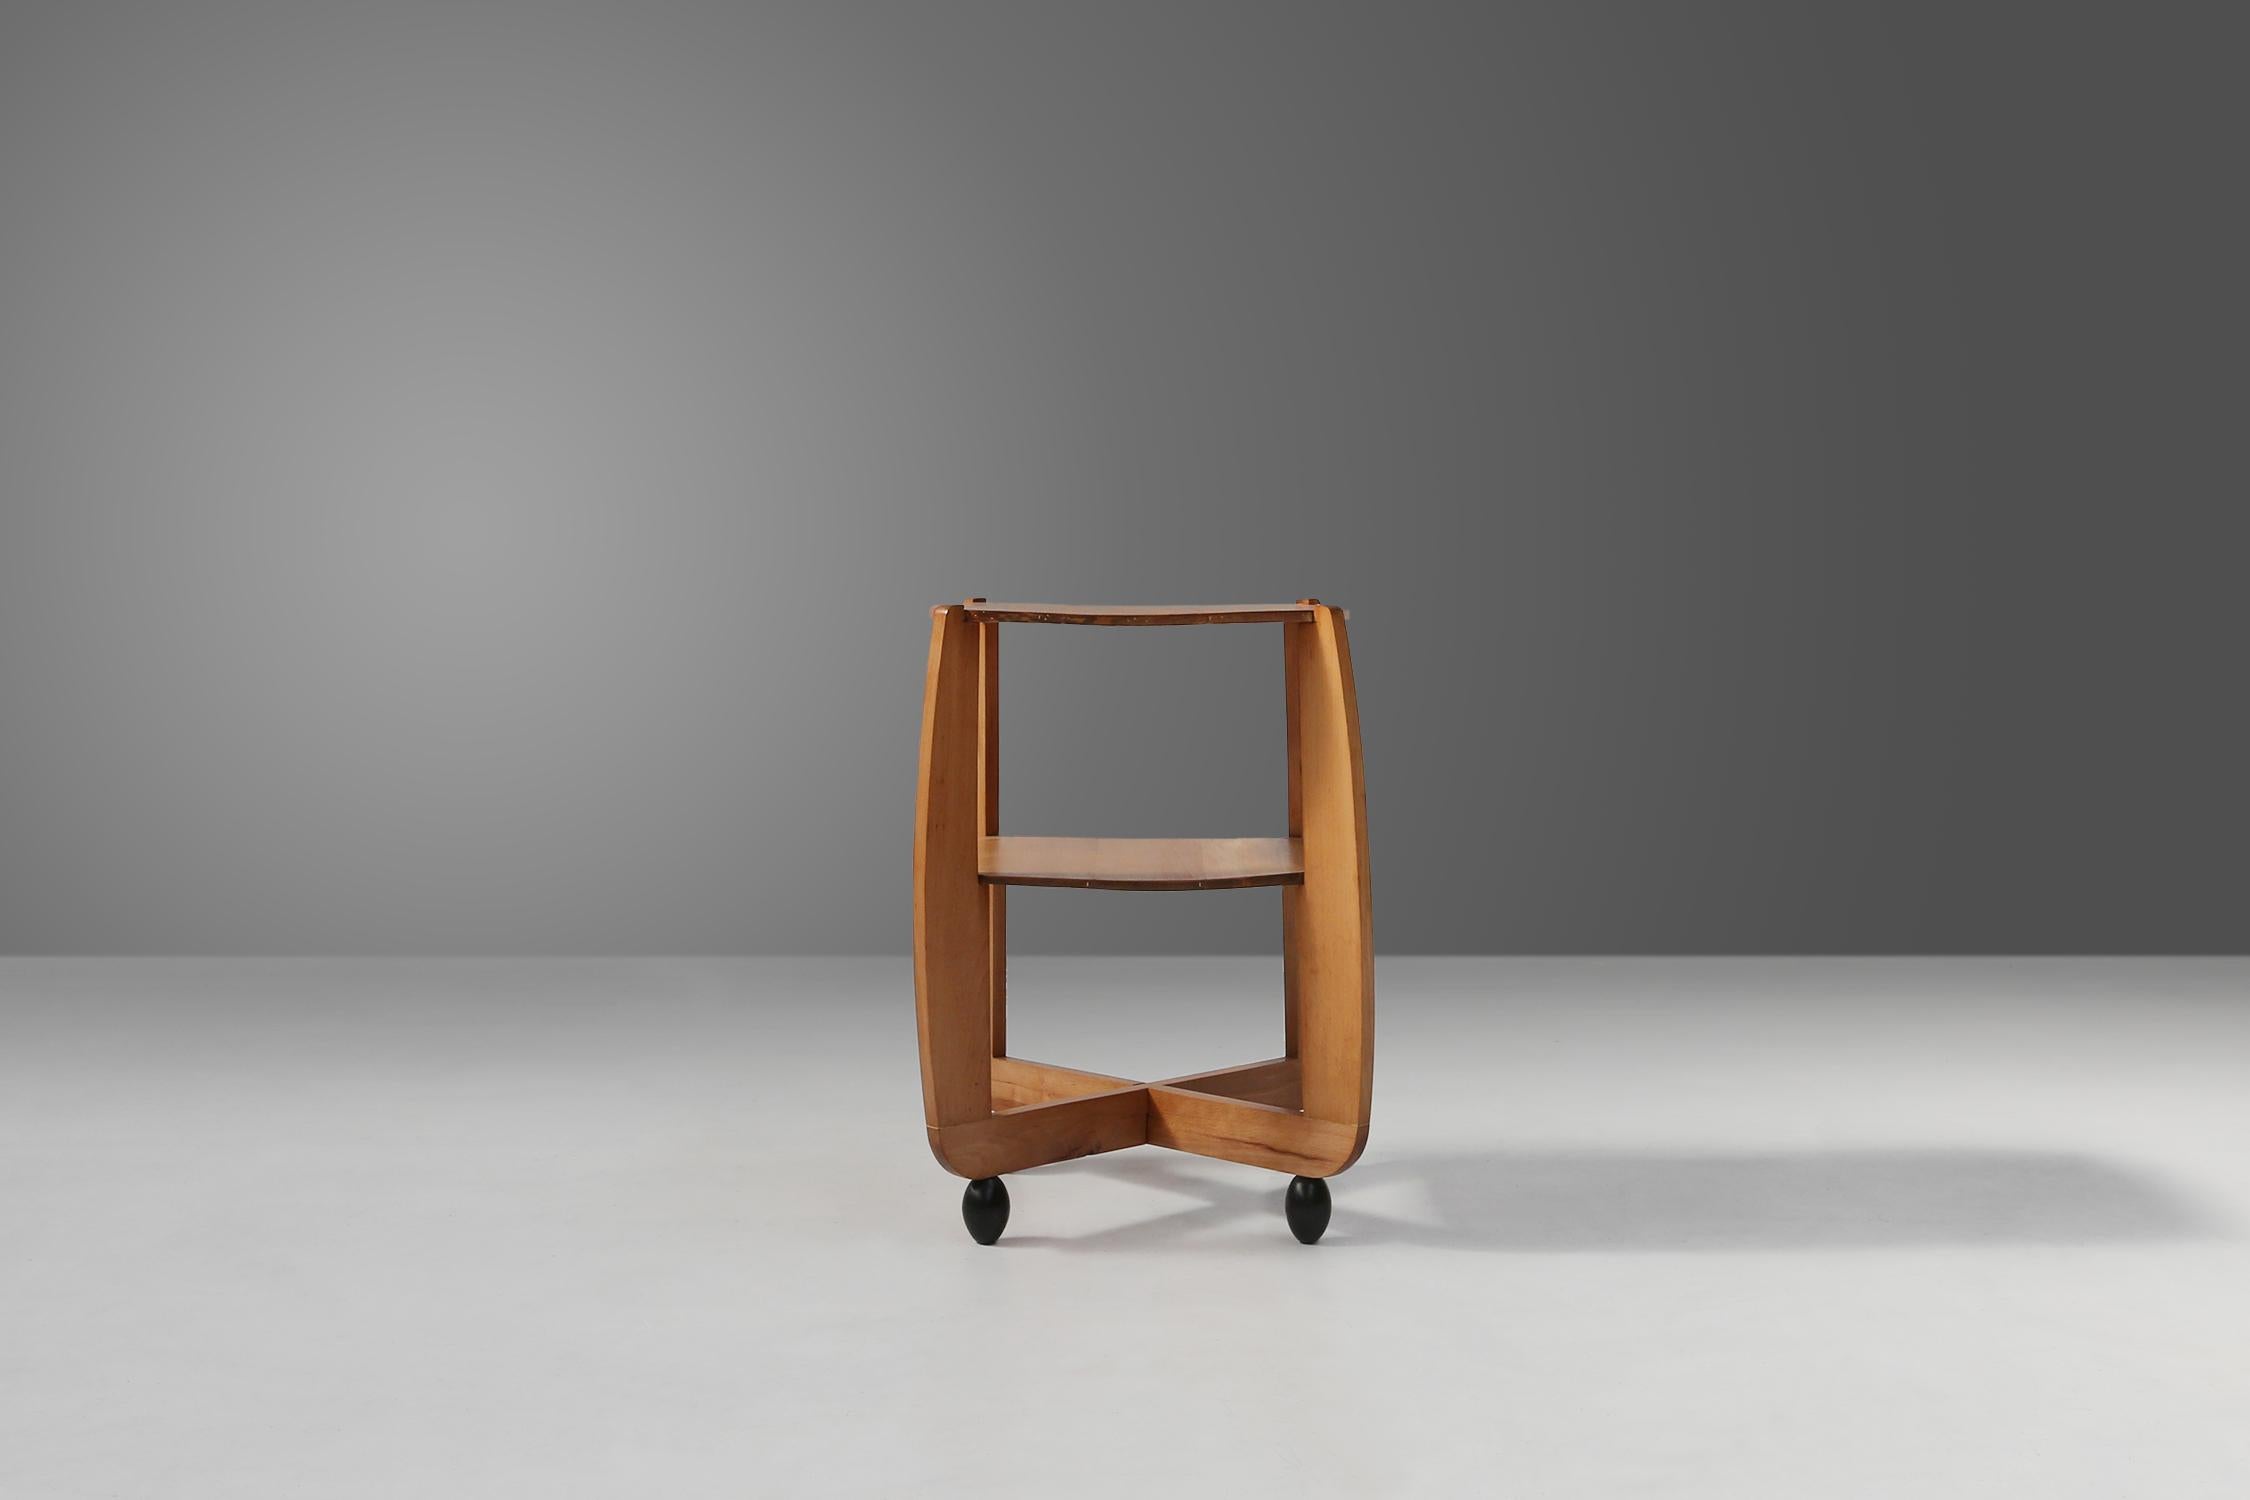 This side table is an authentic piece from the 1920s, made in the Amsterdam School style. This style is characterized by the use of geometric shapes, expressive lines and rich materials. The side table is made of beech wood, a durable and natural